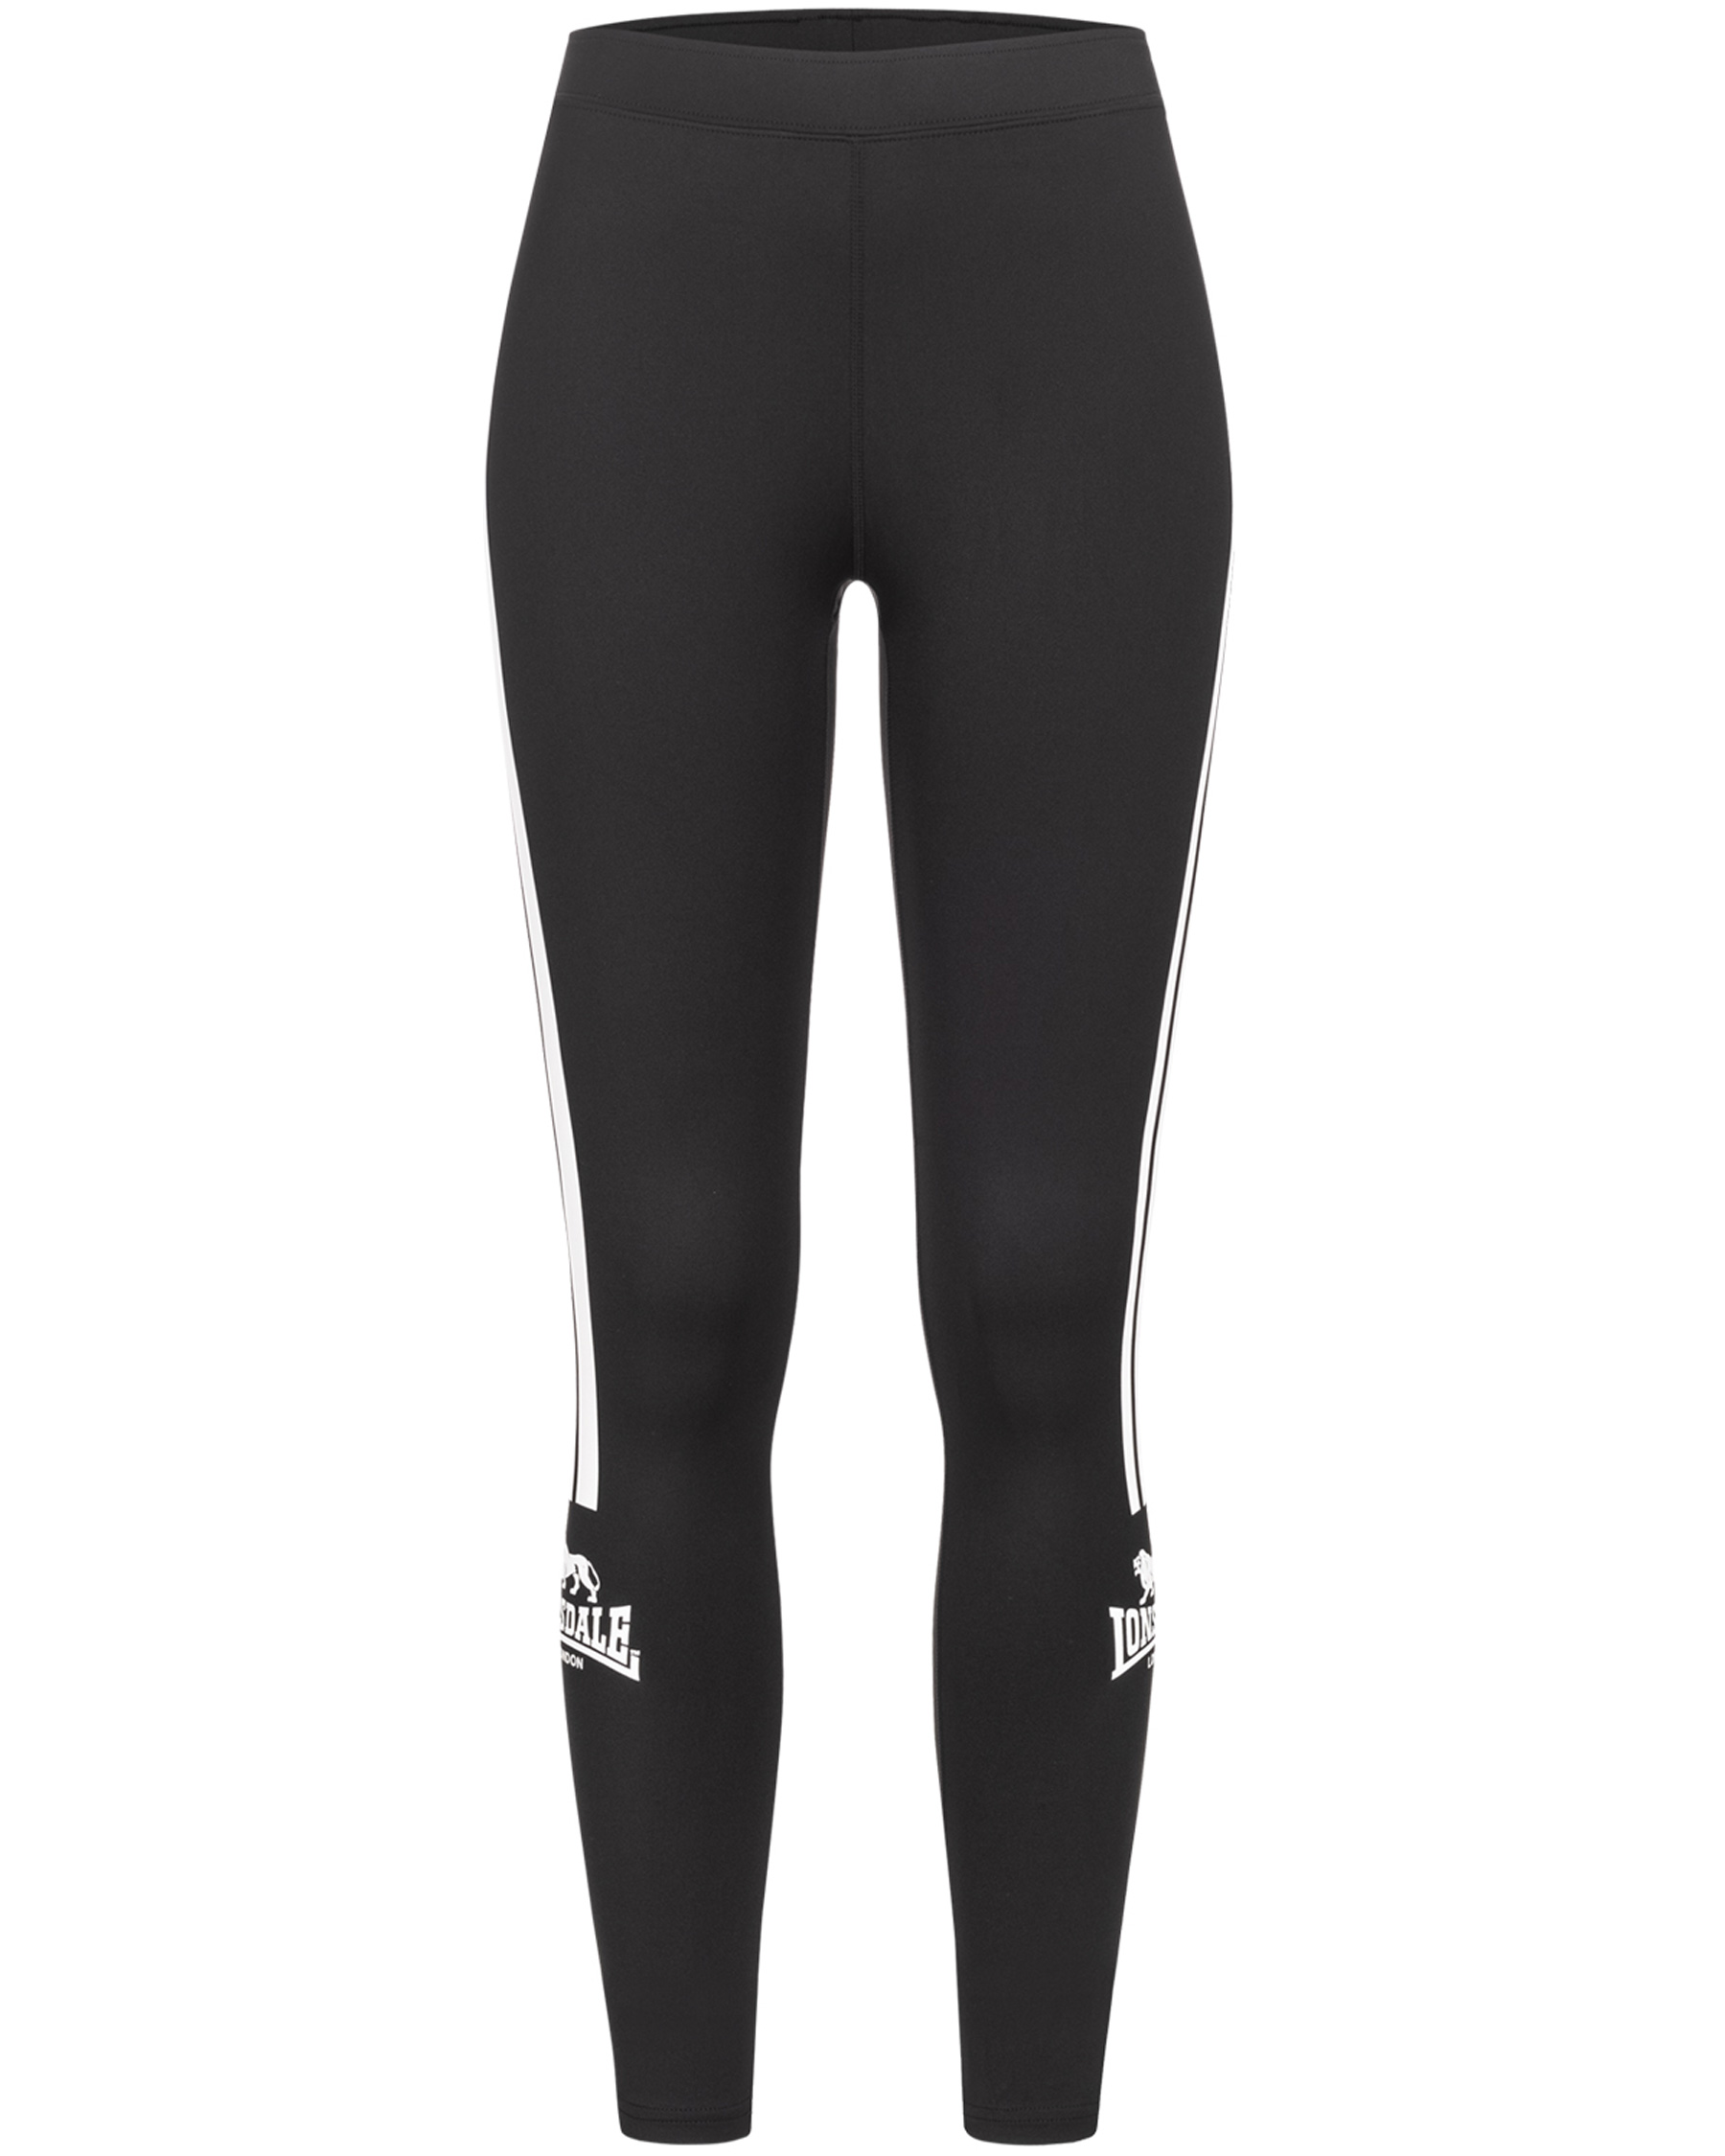 Lonsdale Sportleggings Mallowhayes